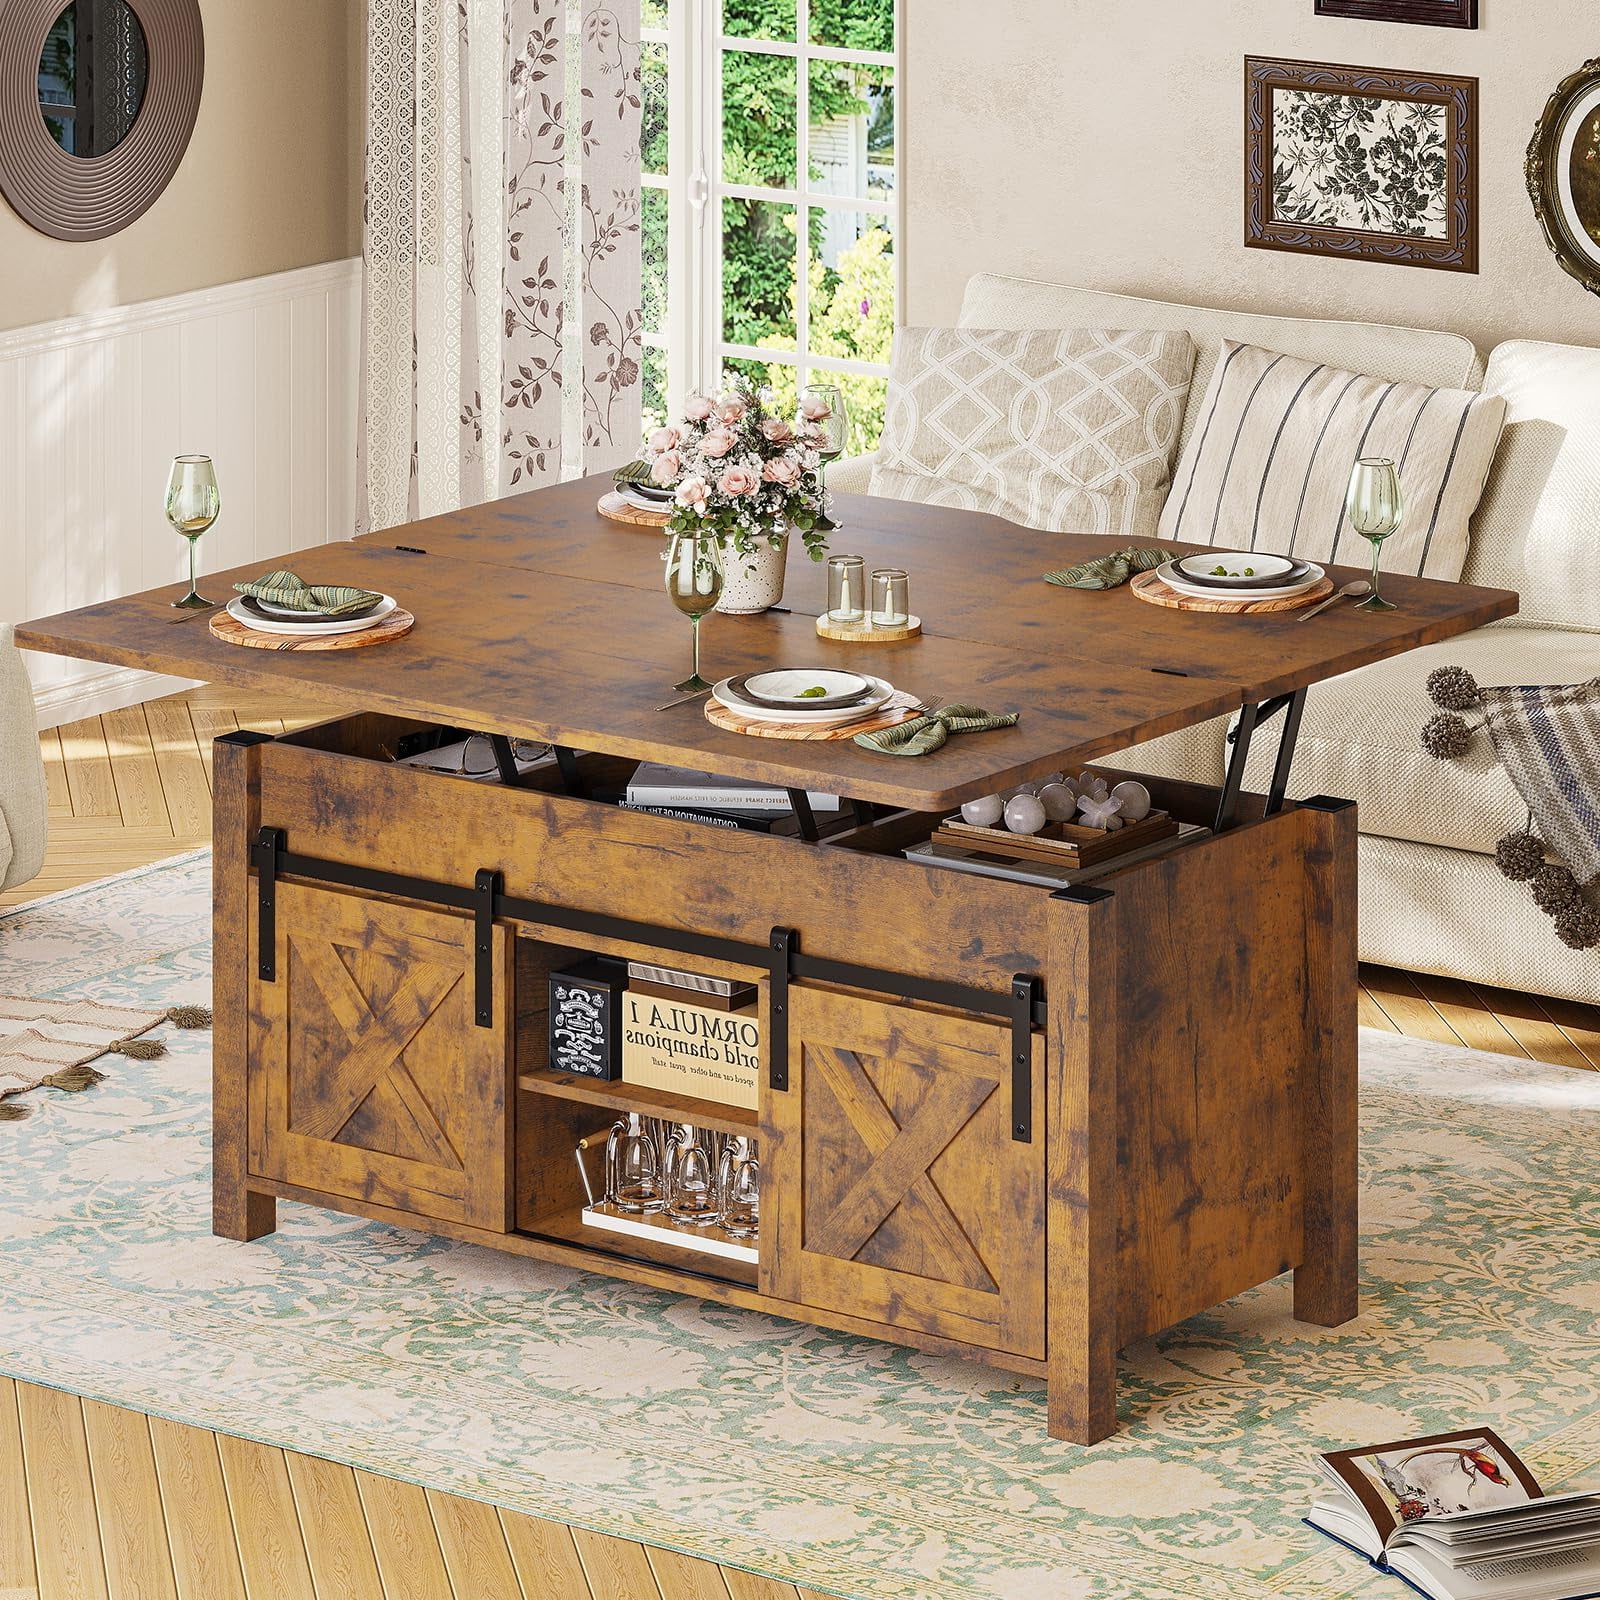 Coffee Table For Living Room, Farmhouse Lift Top Coffee Tables With Storage  And Hidden Compartment, Rising Tabletop Center Table For Living Room  Reception Room, Rustic Brown – Walmart Within Most Recently Released Lift Top Coffee Tables (View 10 of 26)